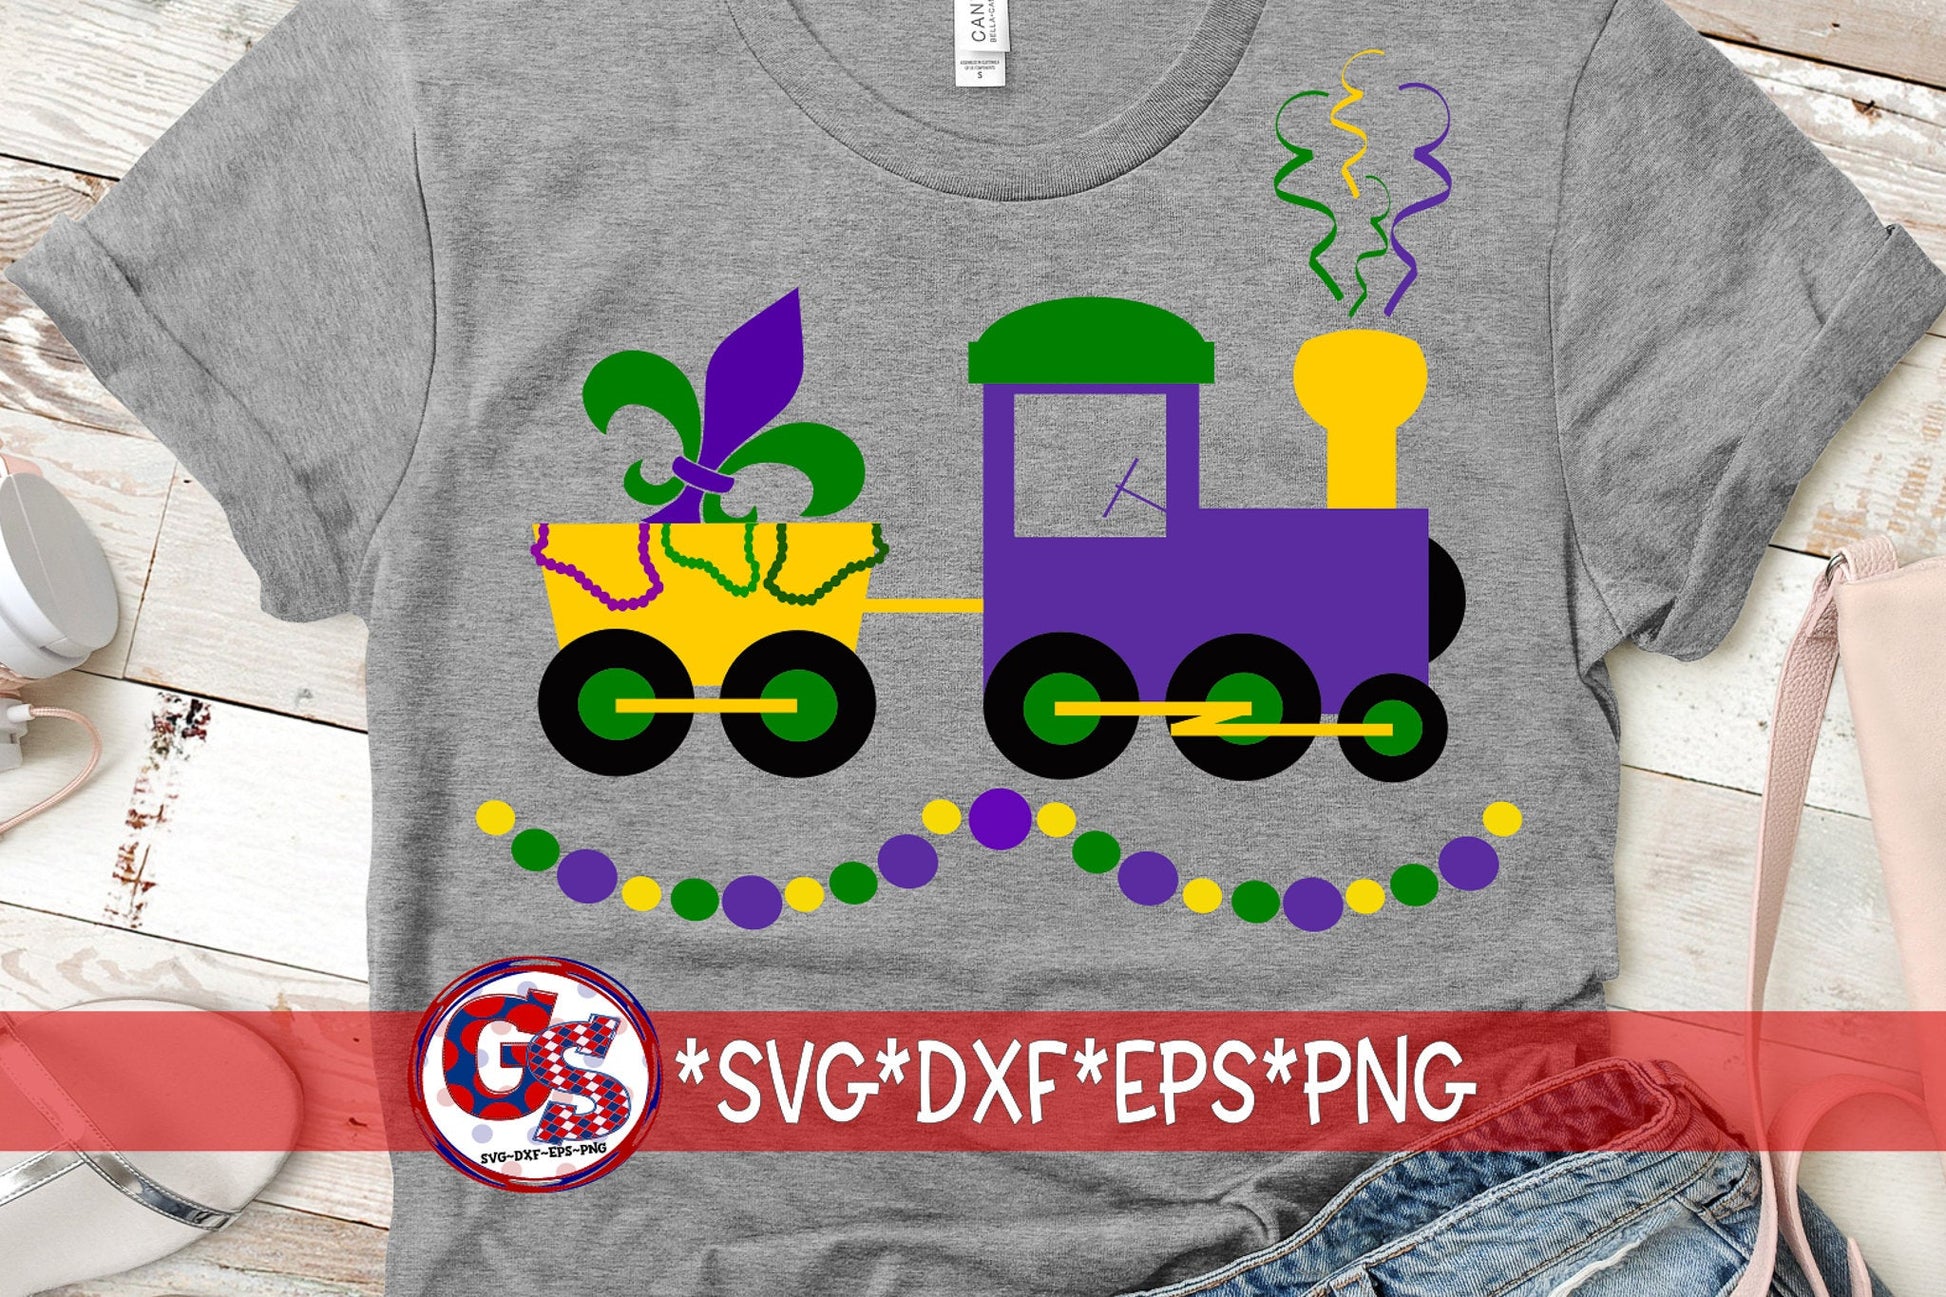 Mardi Gras Train svg, dxf, eps, and png.  Mardi Gras Parade SvG | Mardi Gras Train SvG | Mardi Gras SvG | Instant Download Cut Files.